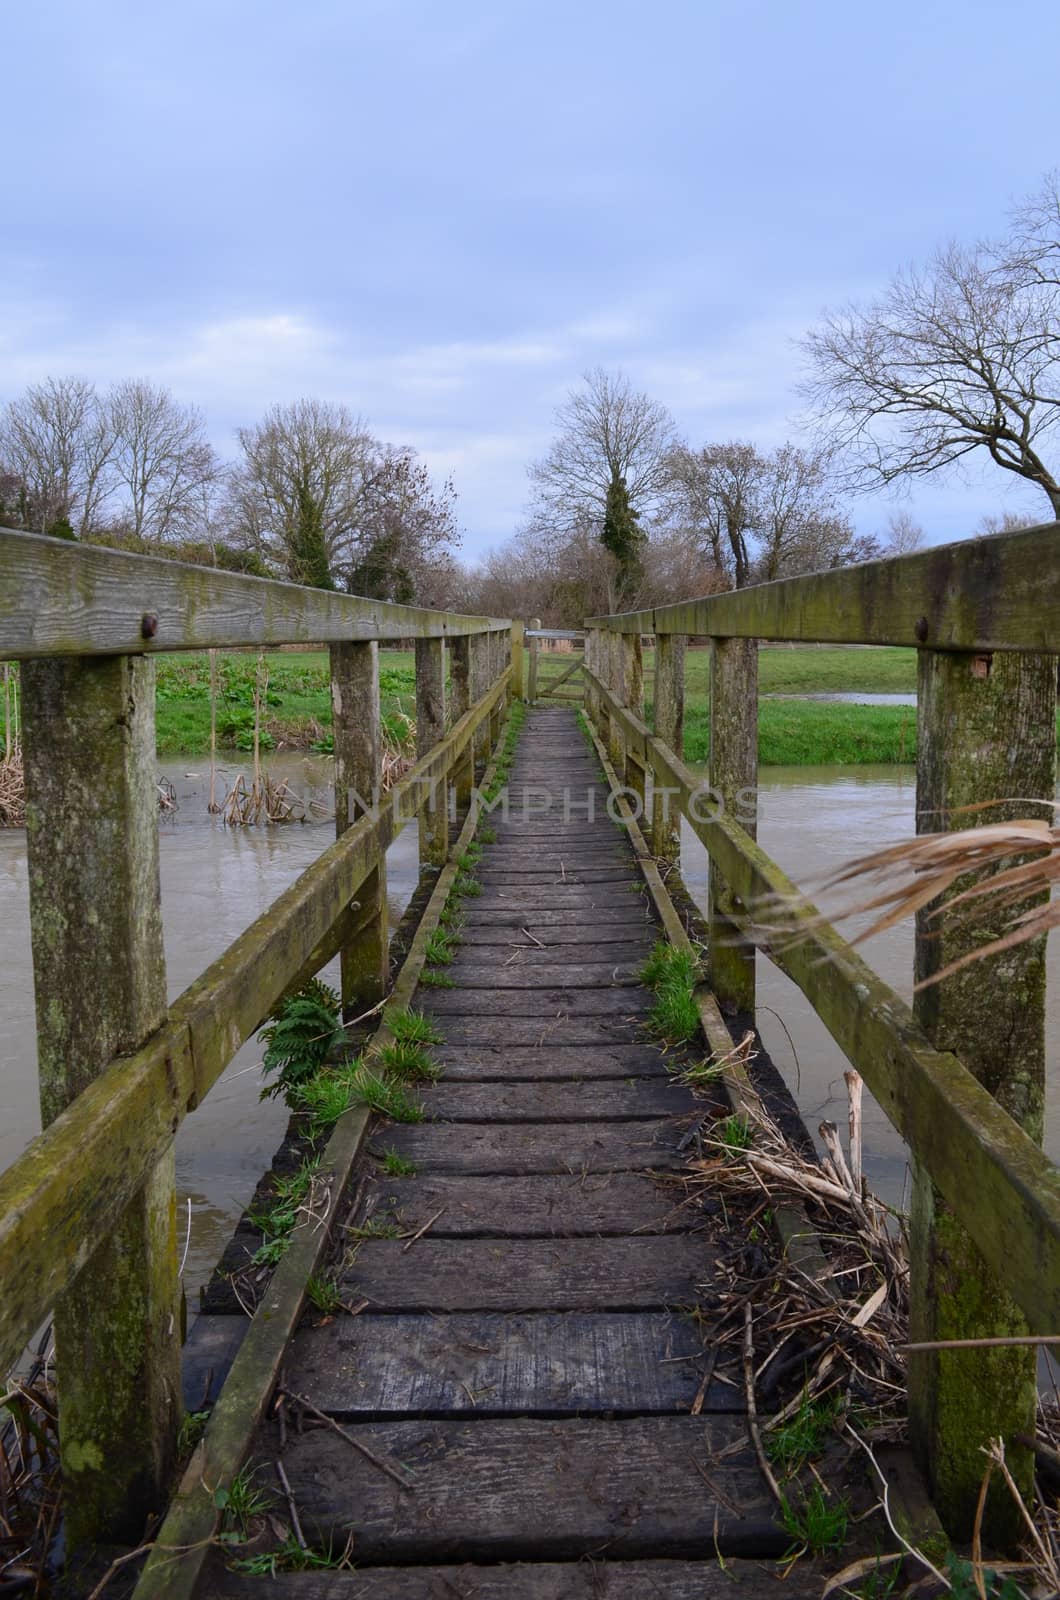 Wooden footbridge crossing a stretch of the River Ouse near Barcombe Mills, Sussex, England.